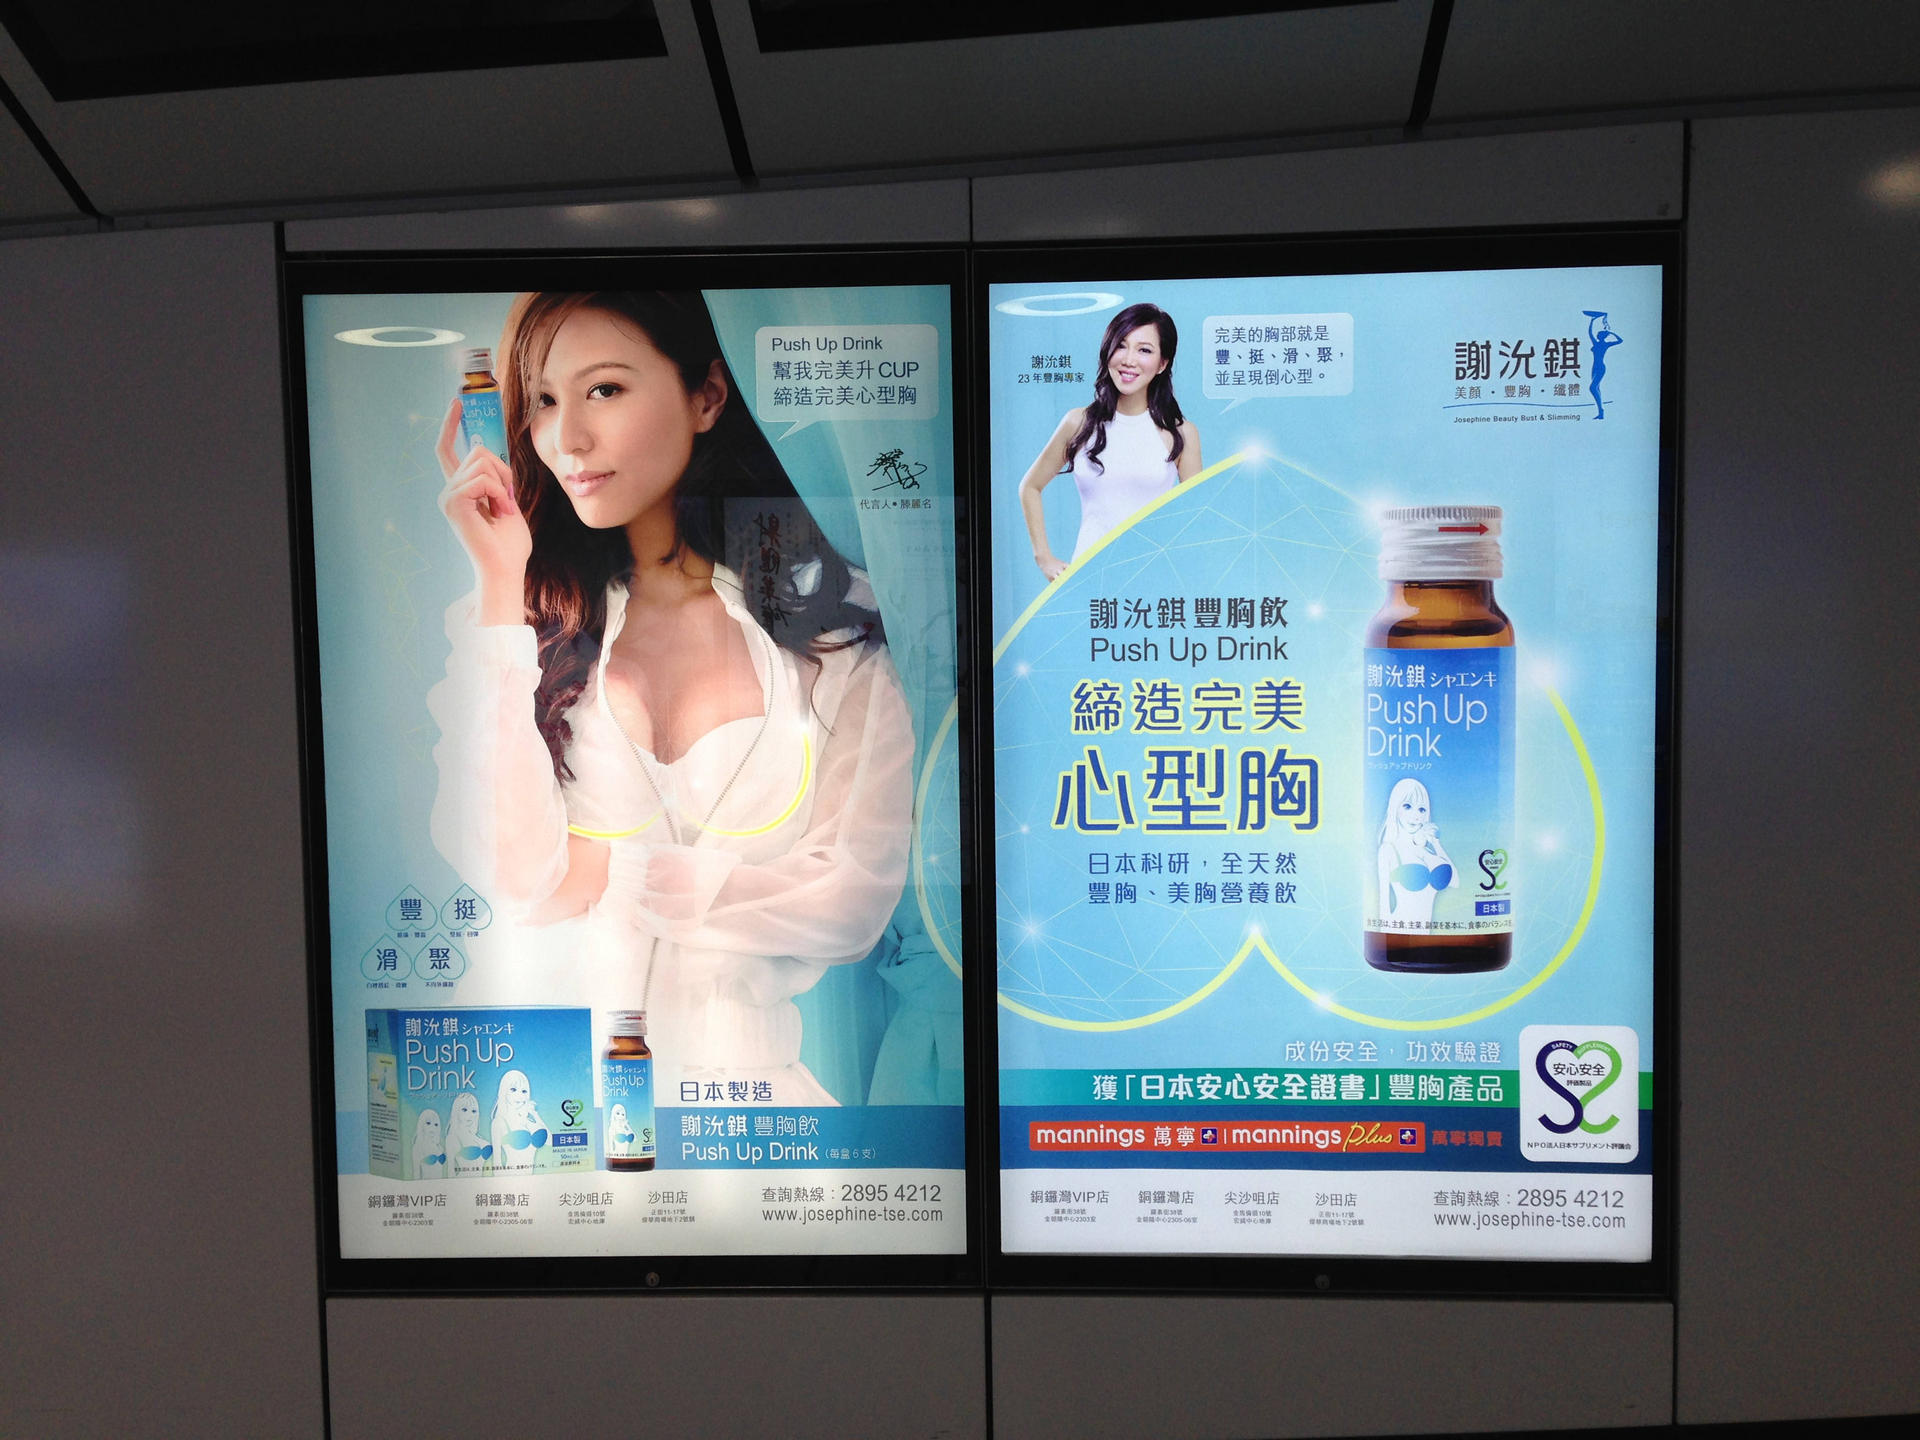 The Push Up Drink has been heavily marketed on the MTR.